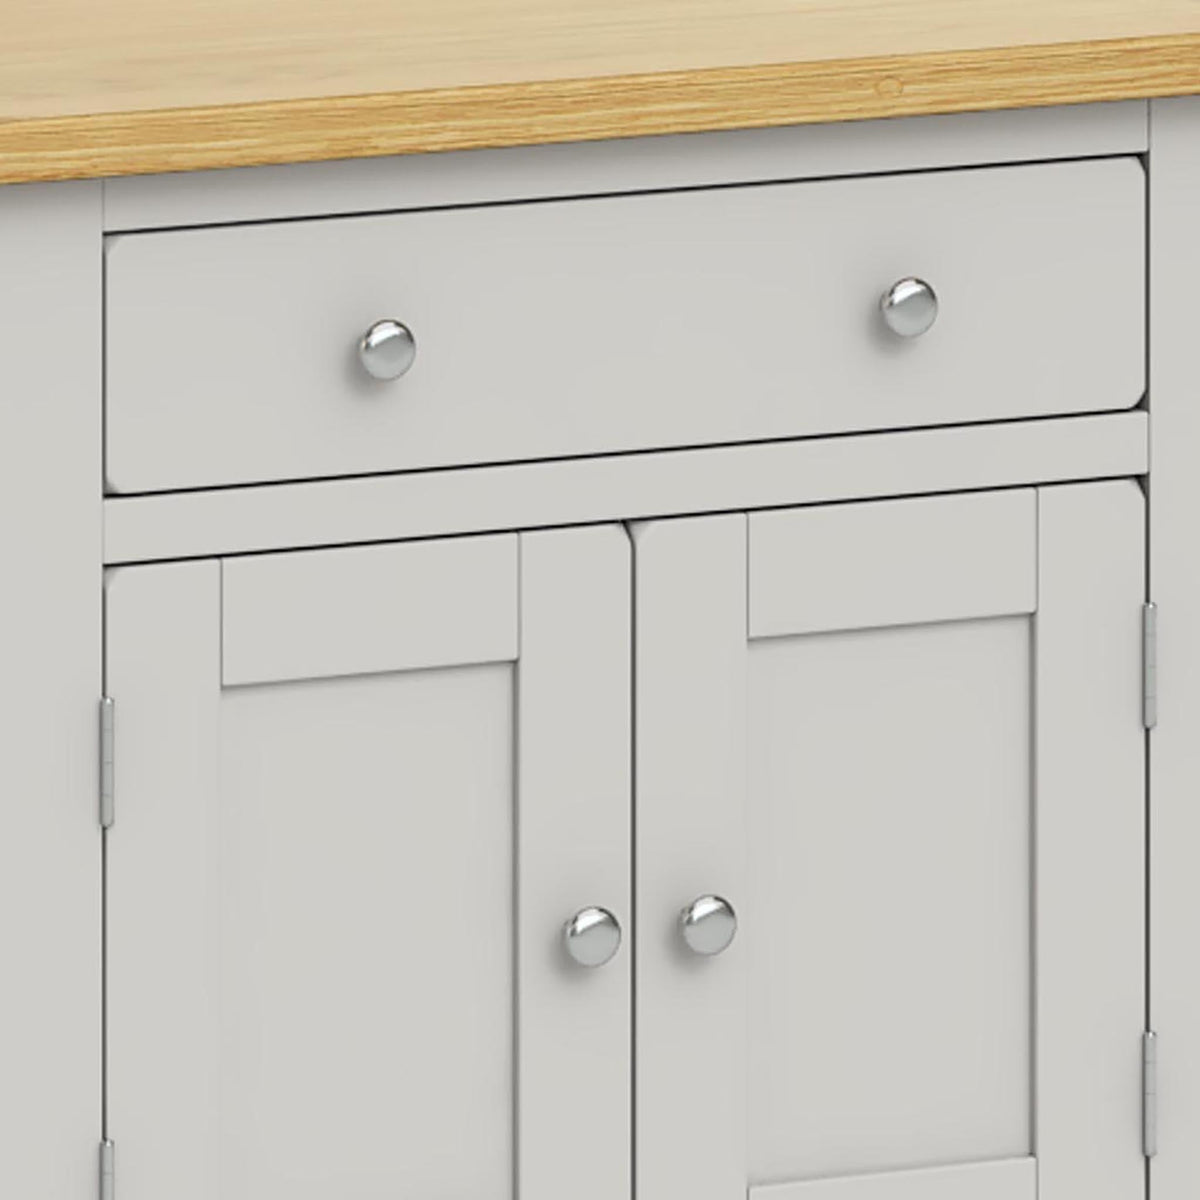 Lundy Grey Mini Sideboard - Close Up of Drawer